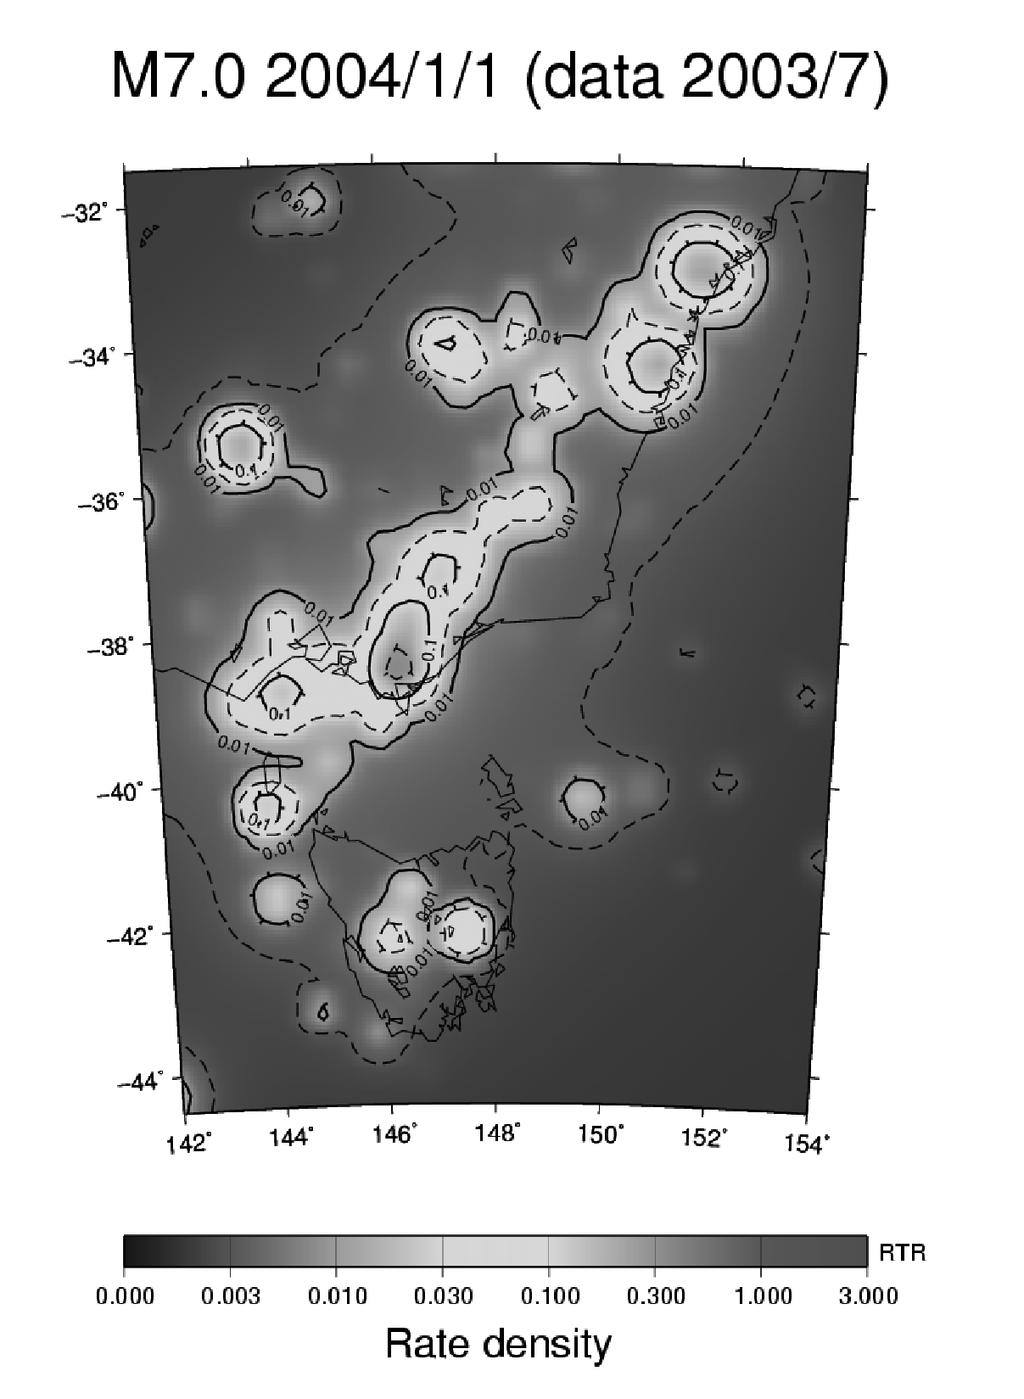 Figure 4. EEPAS rate density of earthquake occurrence in Southeastern Australia as at 2004 Jan 1 for M7.0 in RTR units, i.e. relative to a reference density in which there is an expectation of 1 earthquake per year exceeding any magnitude m in an area of 10m km 2.